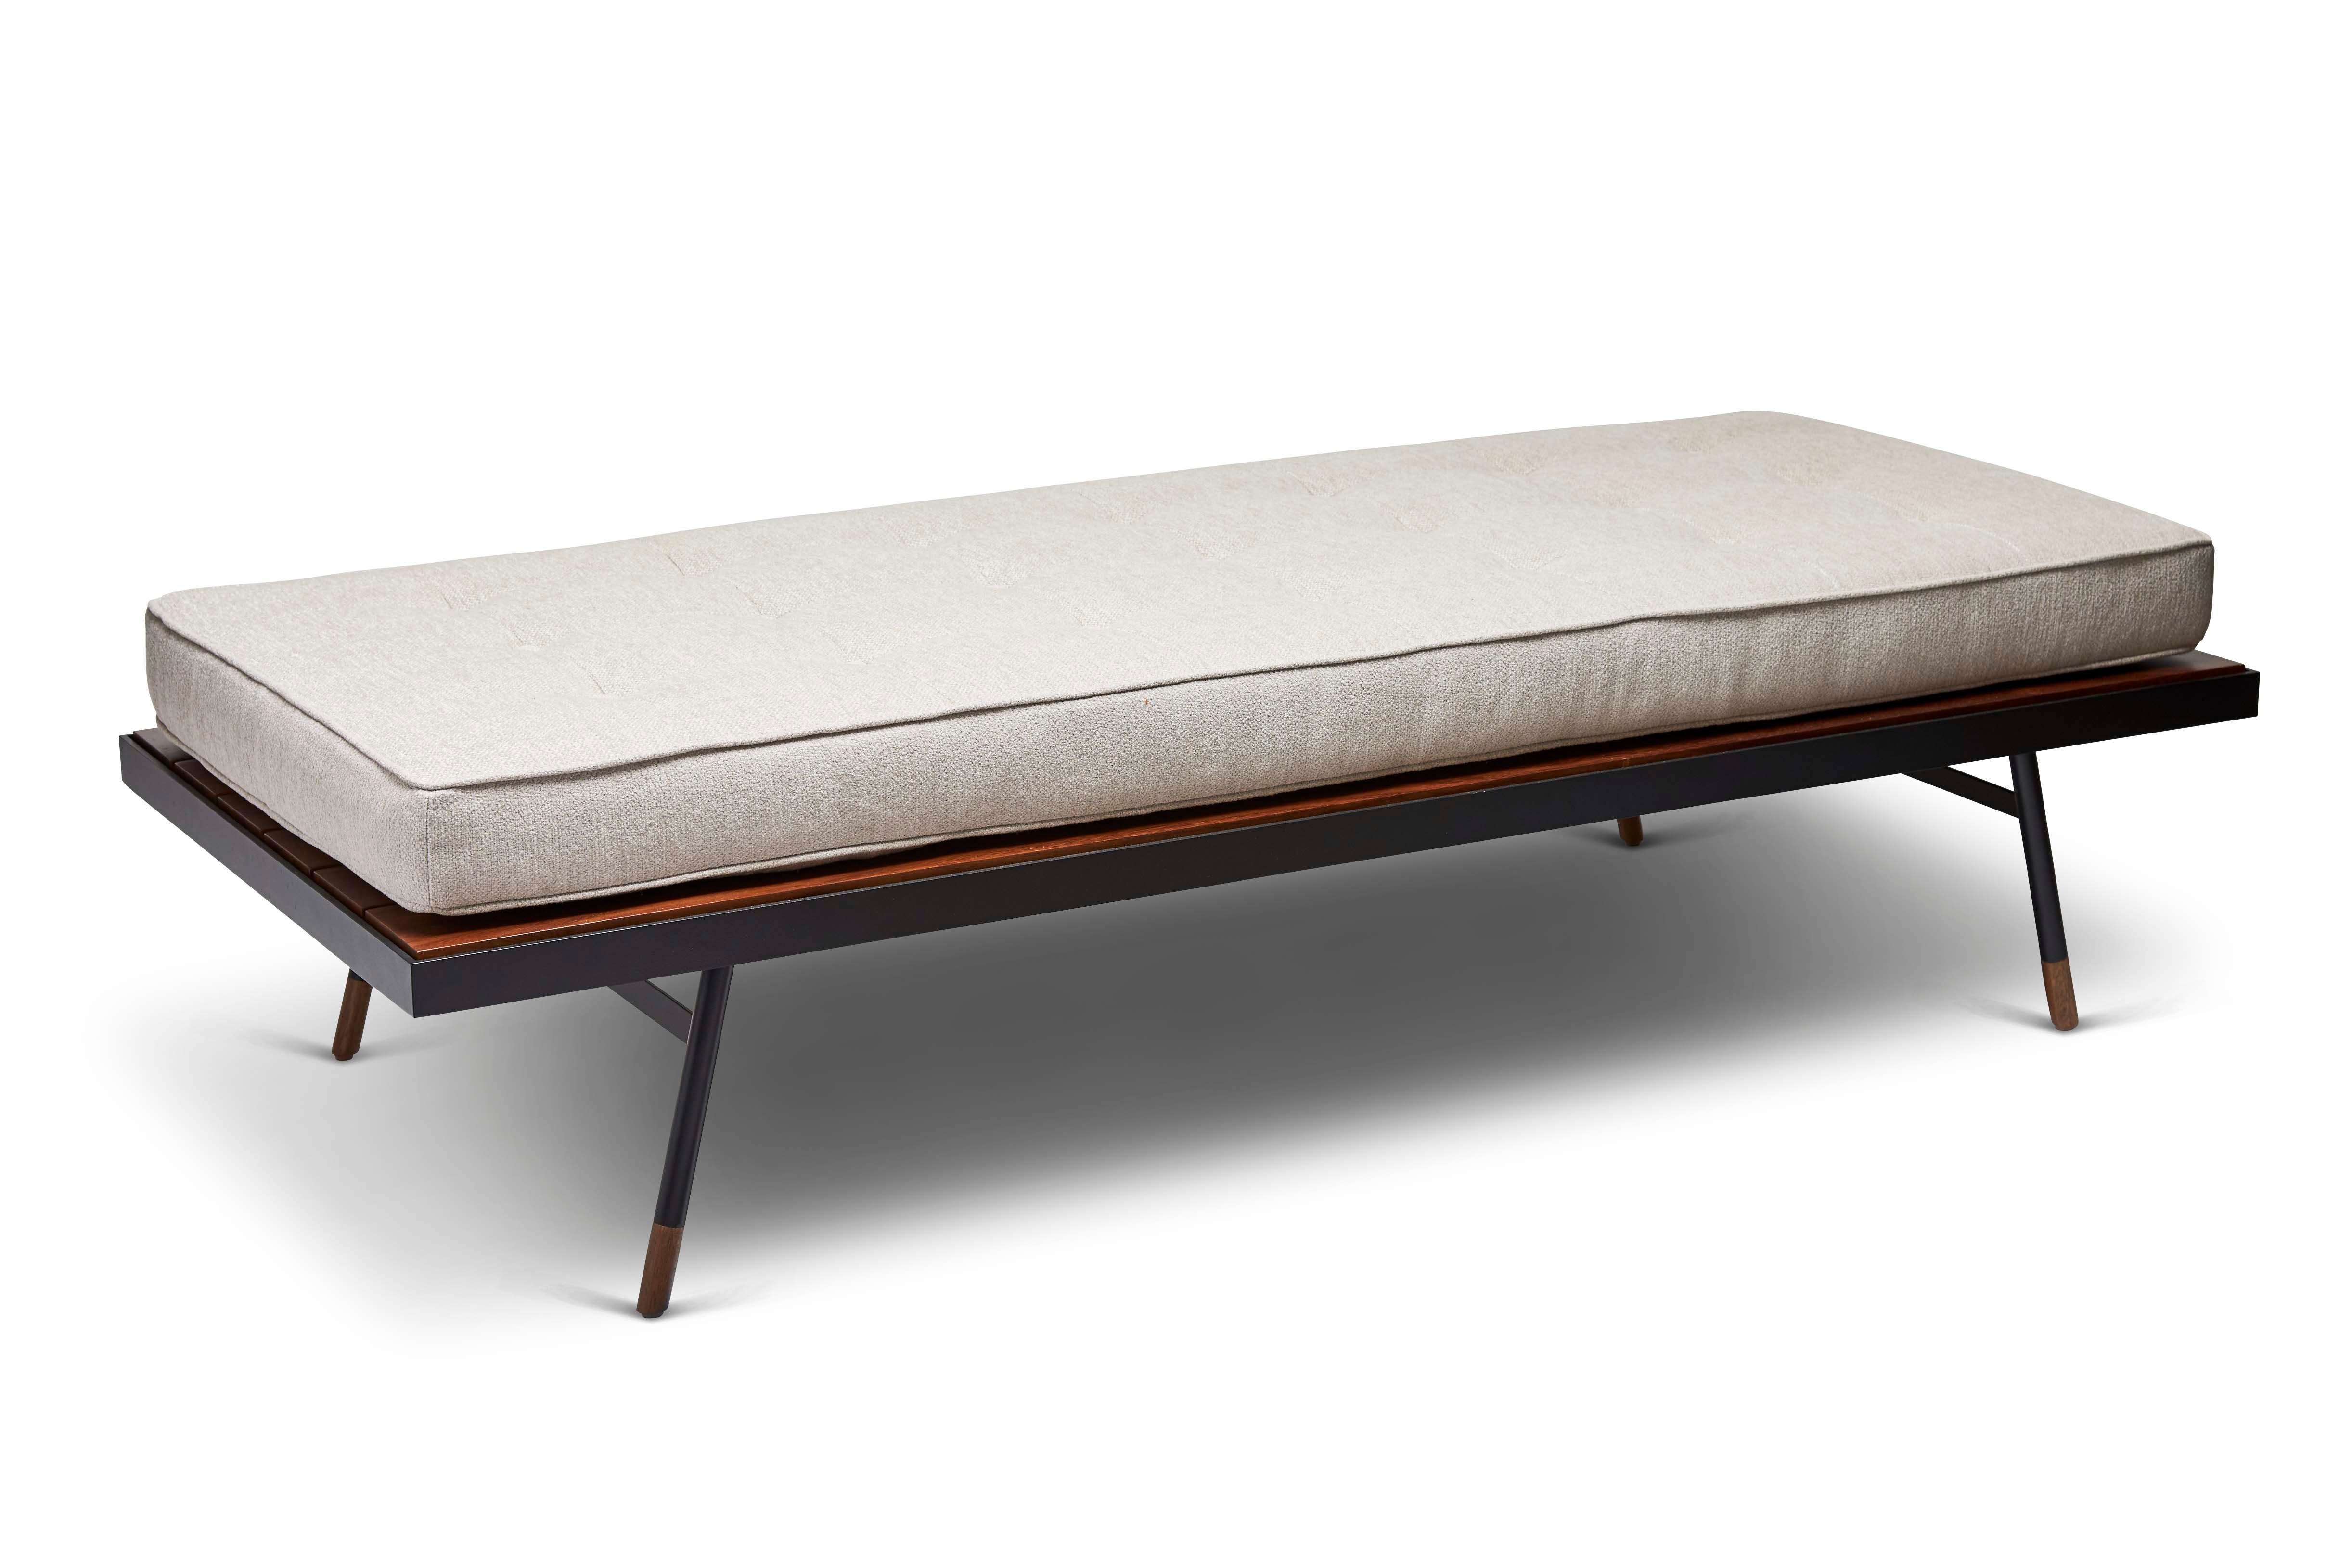 American Indoor/Outdoor Montrose Daybed by Lawson-Fenning